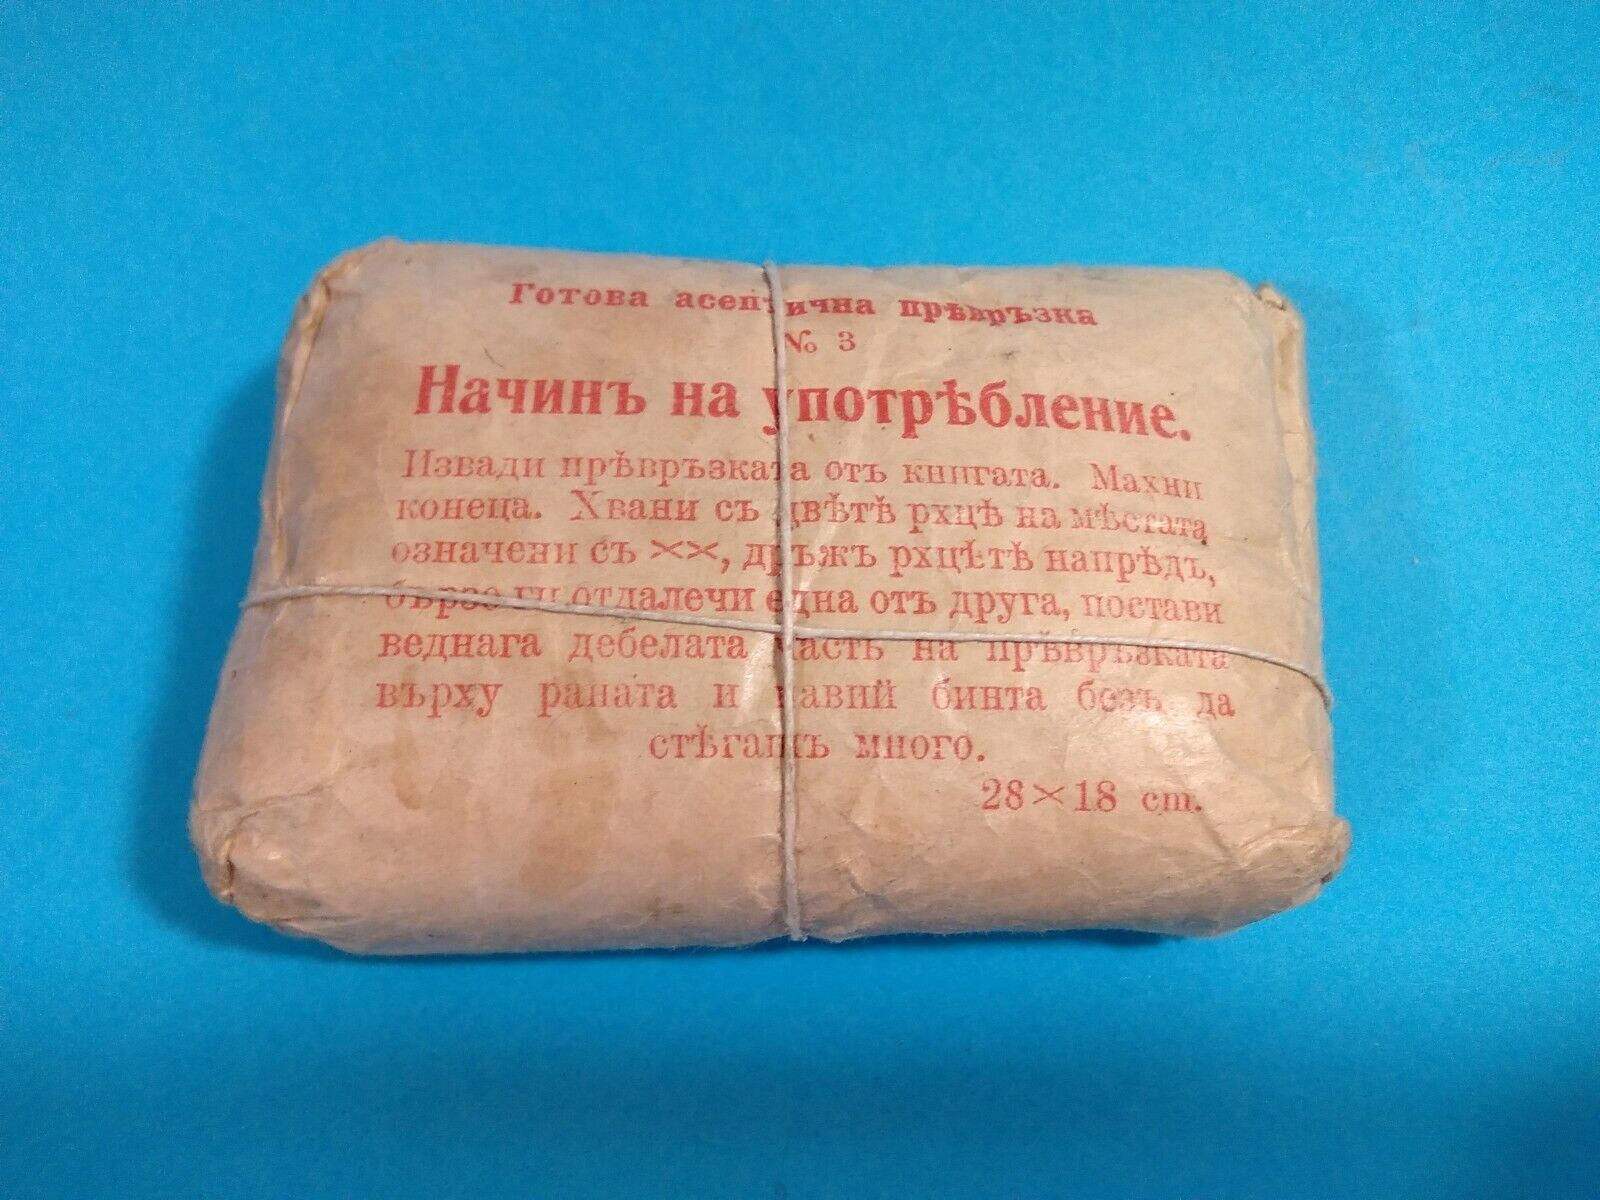 Vintage Bulgarian military package for the treatment of wounds. 1910-20